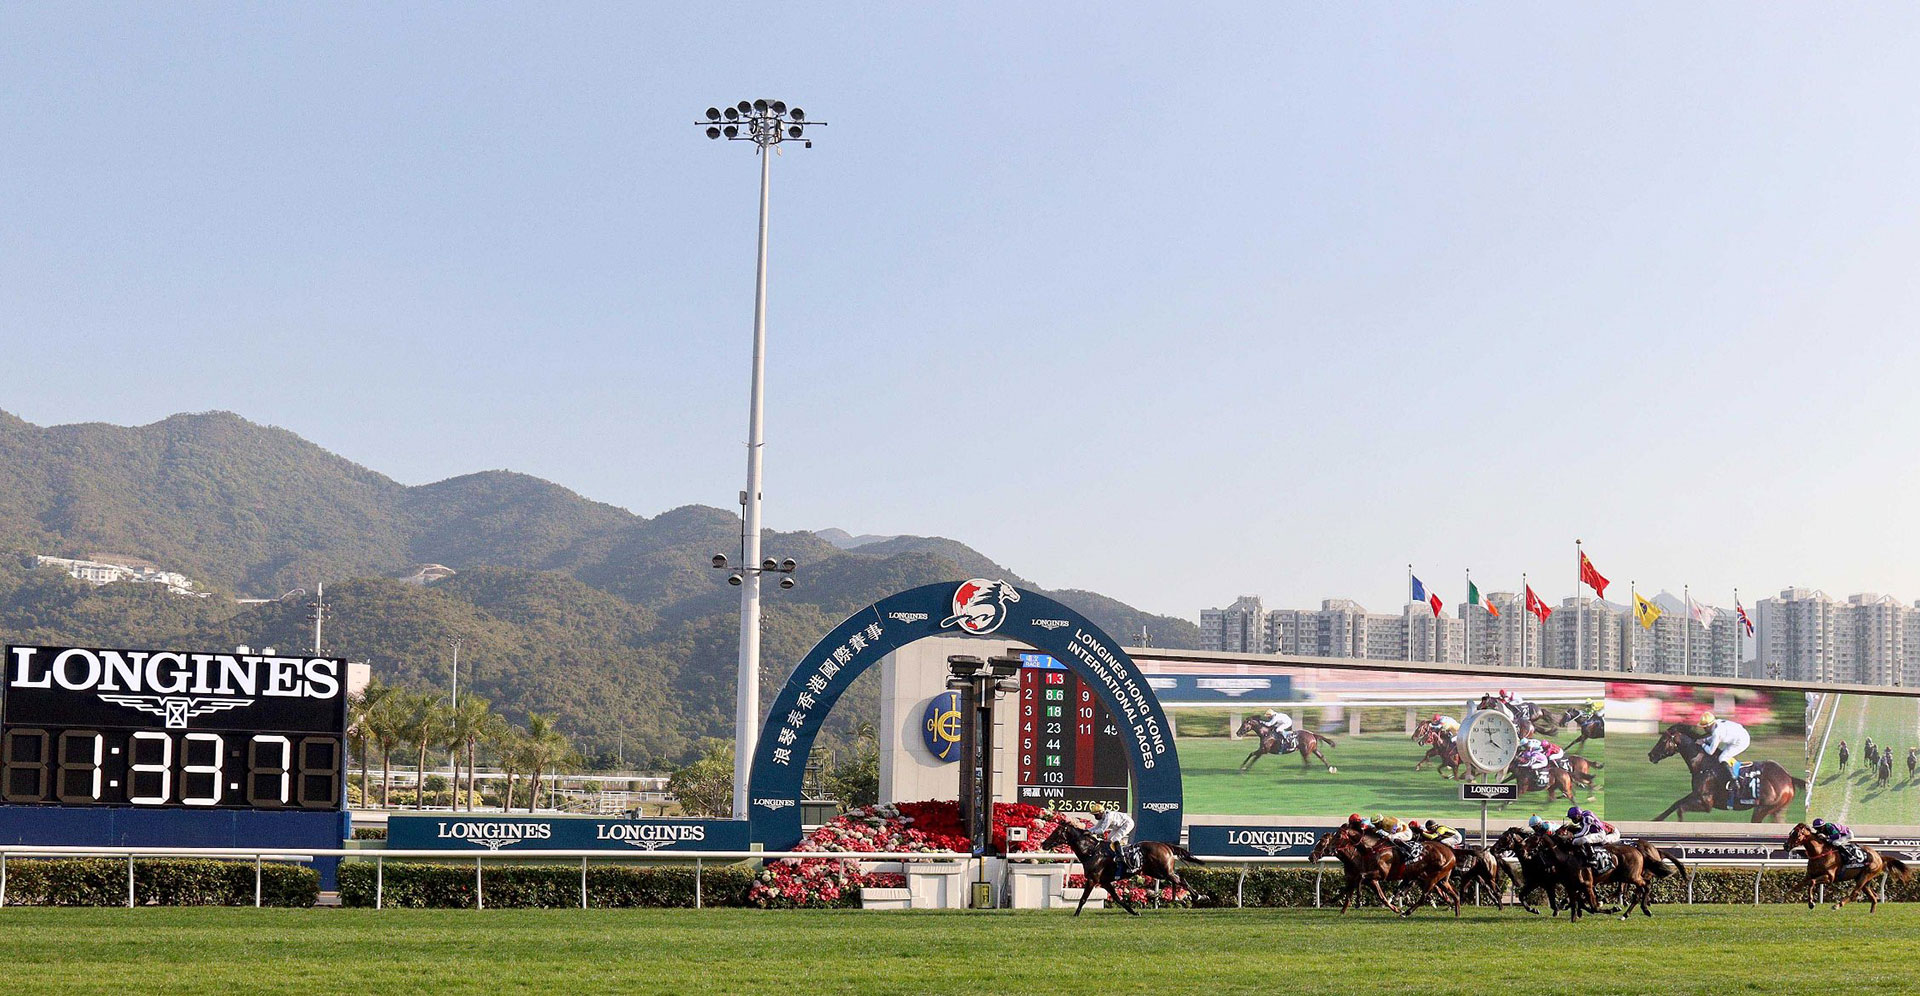 The popularity of commingling shows the worldwide appeal of Hong Kong racing, which has galloped on throughout the pandemic. 